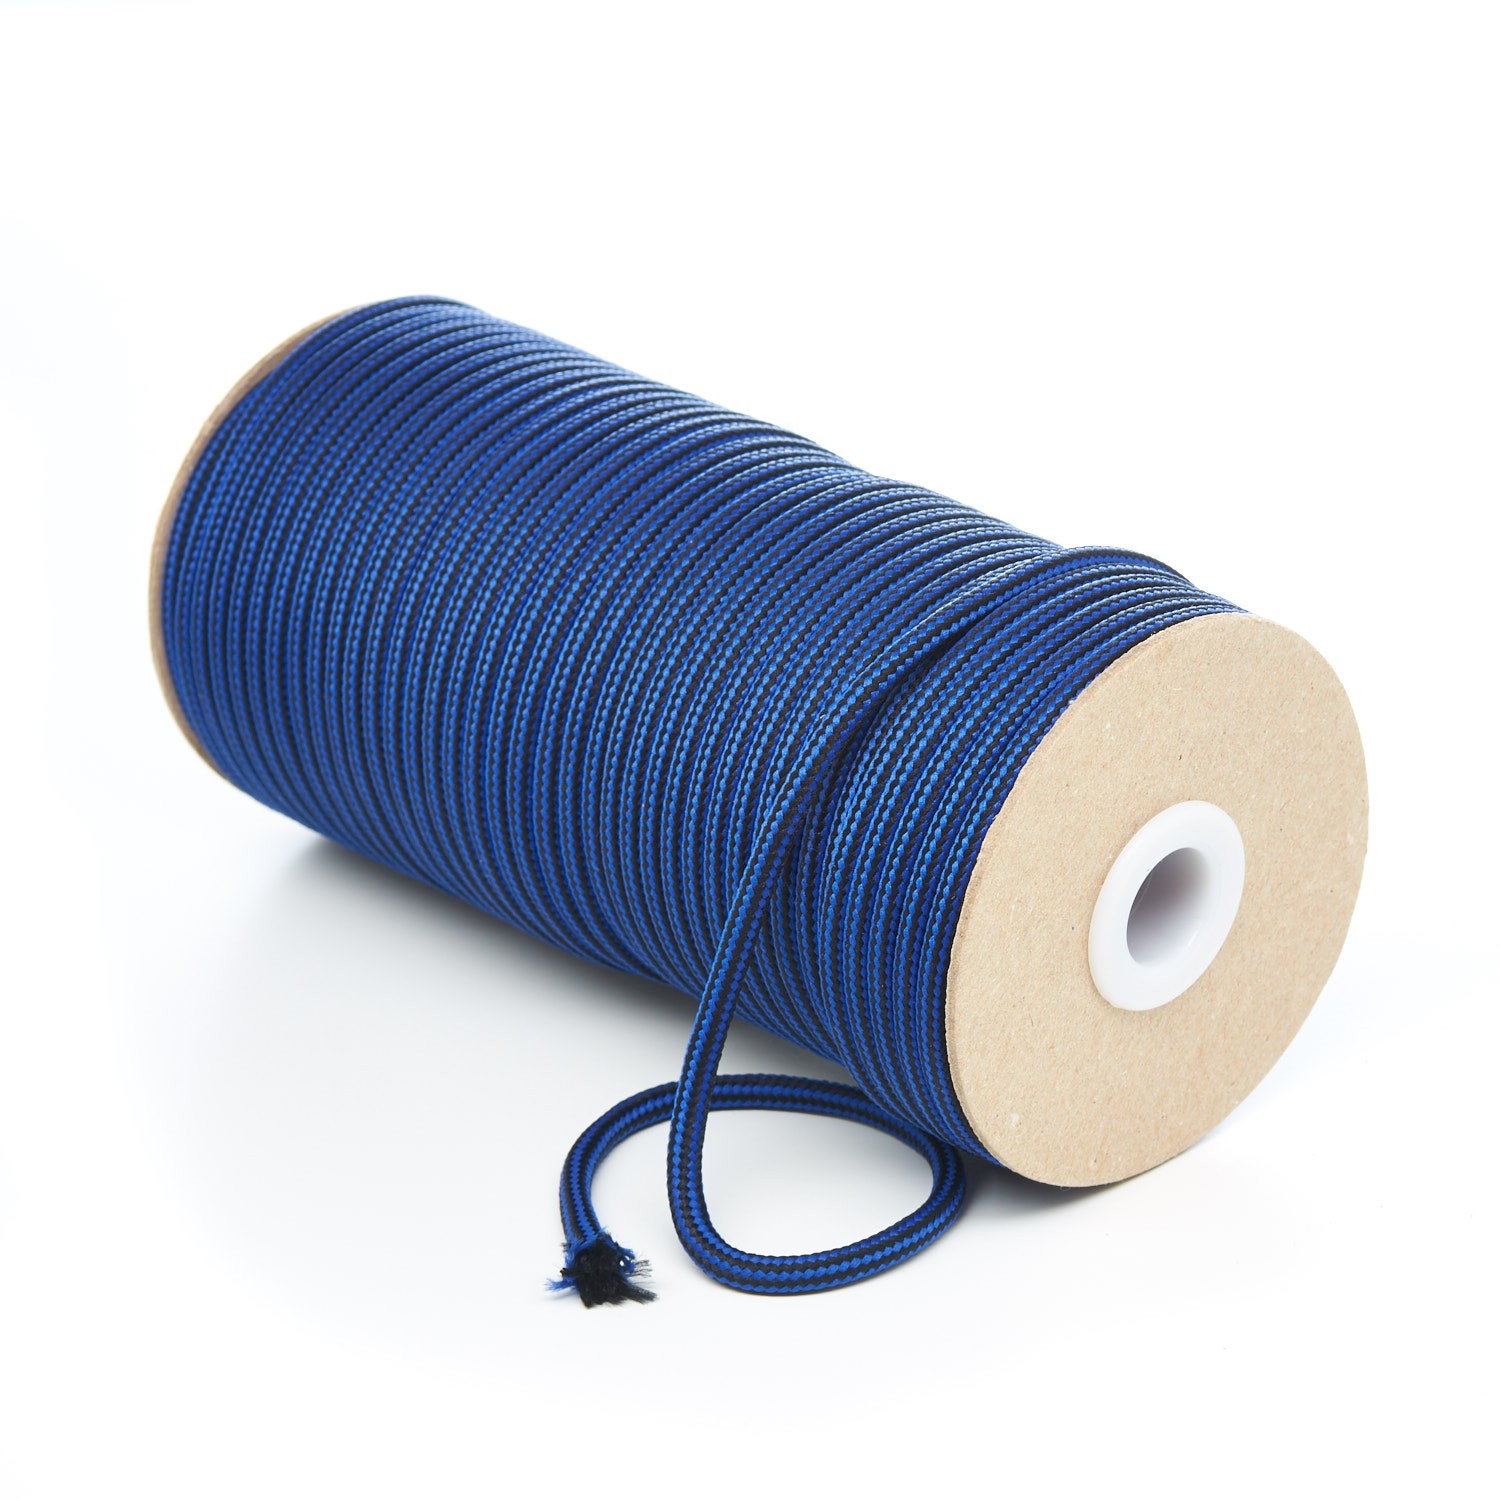 T621 Round Cord Stripes Royal Blue and Black Kalsi Cords